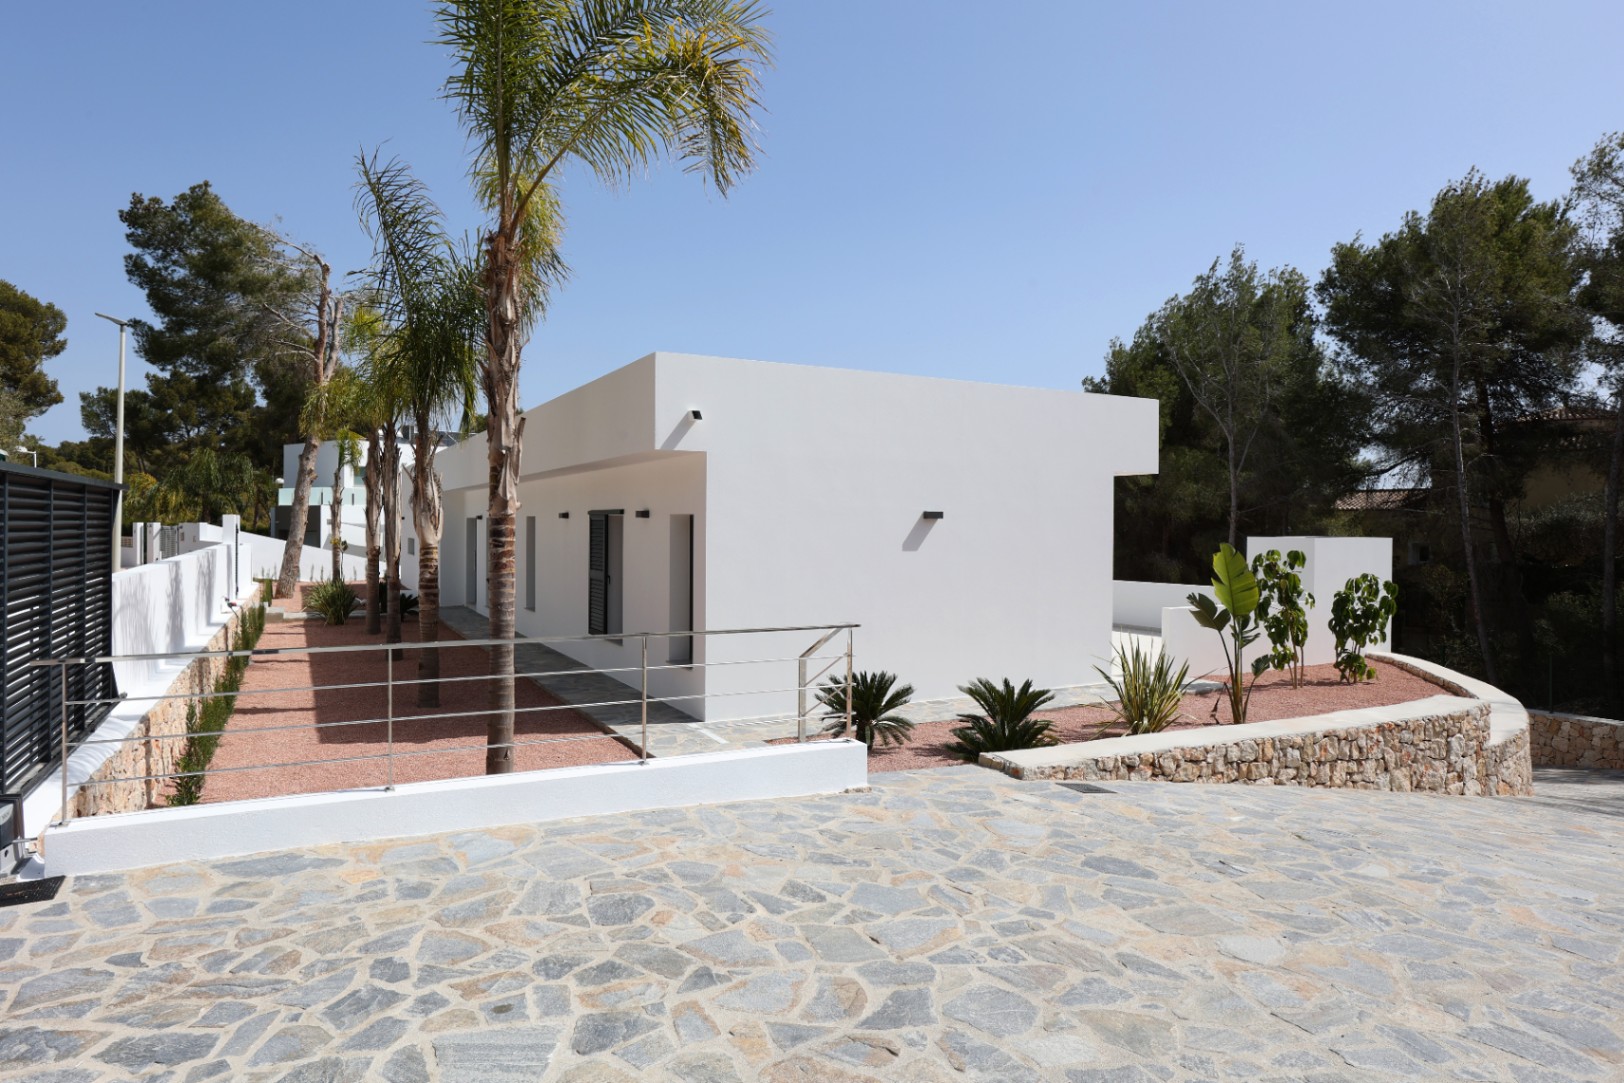 Discover this stunning recently completed modern villa in Benissa